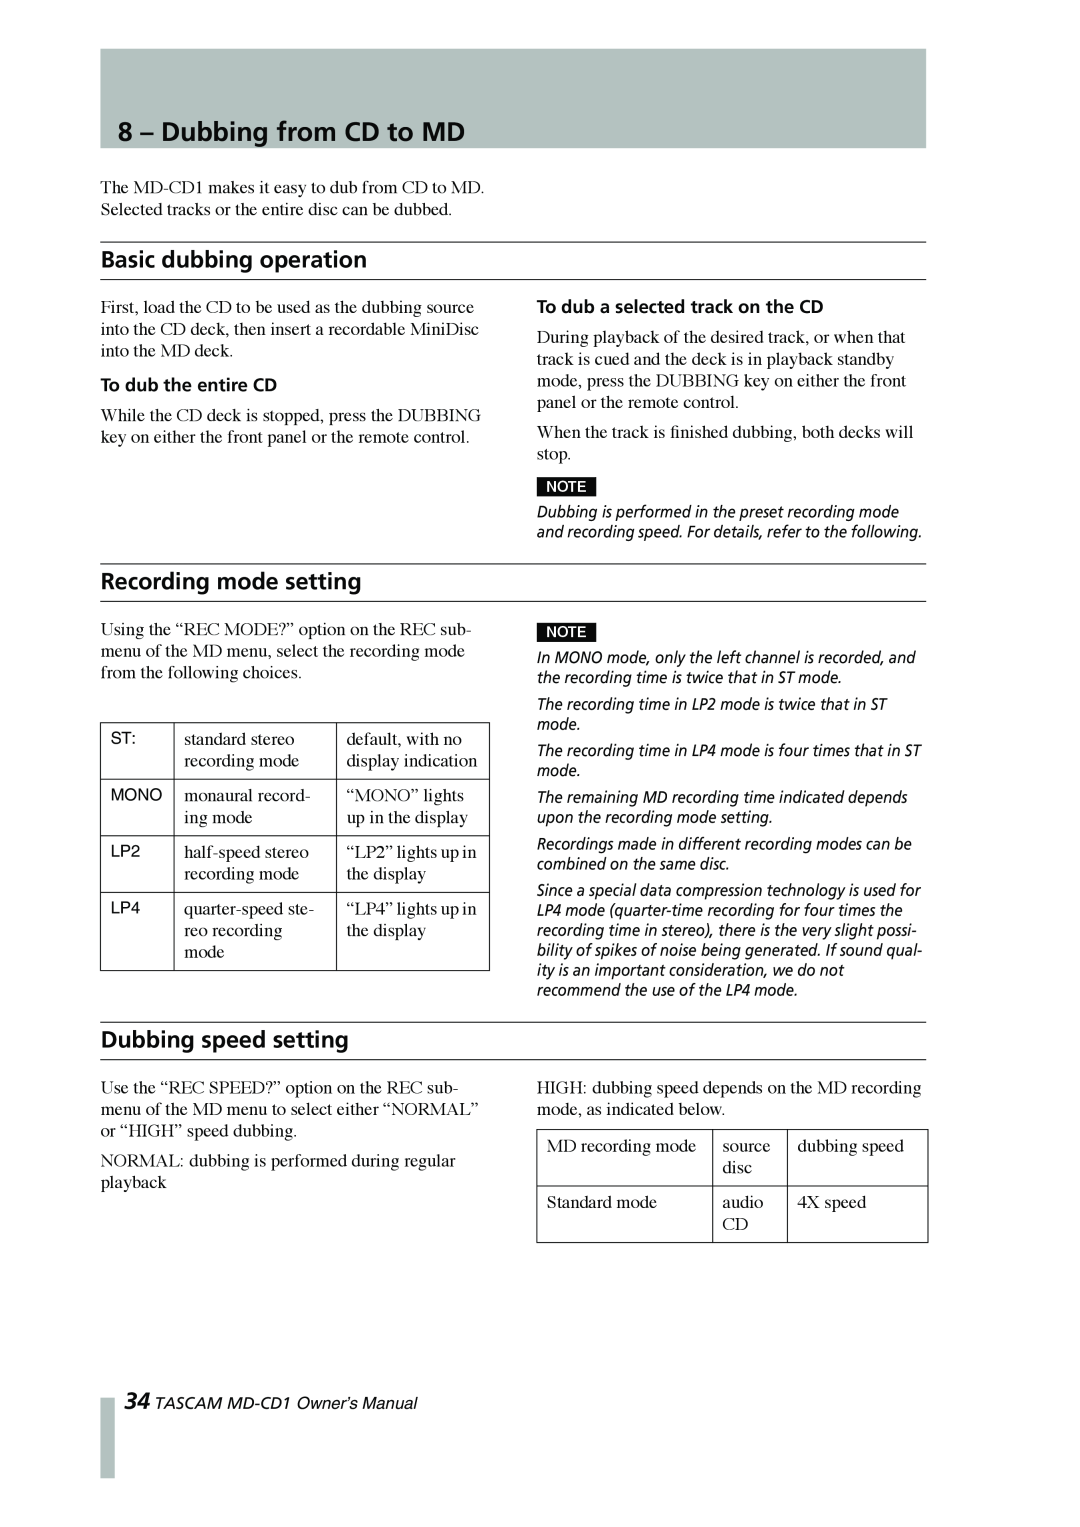 Tascam MD-CD1 owner manual Dubbing from CD to MD, Basic dubbing operation, Recording mode setting, Dubbing speed setting 